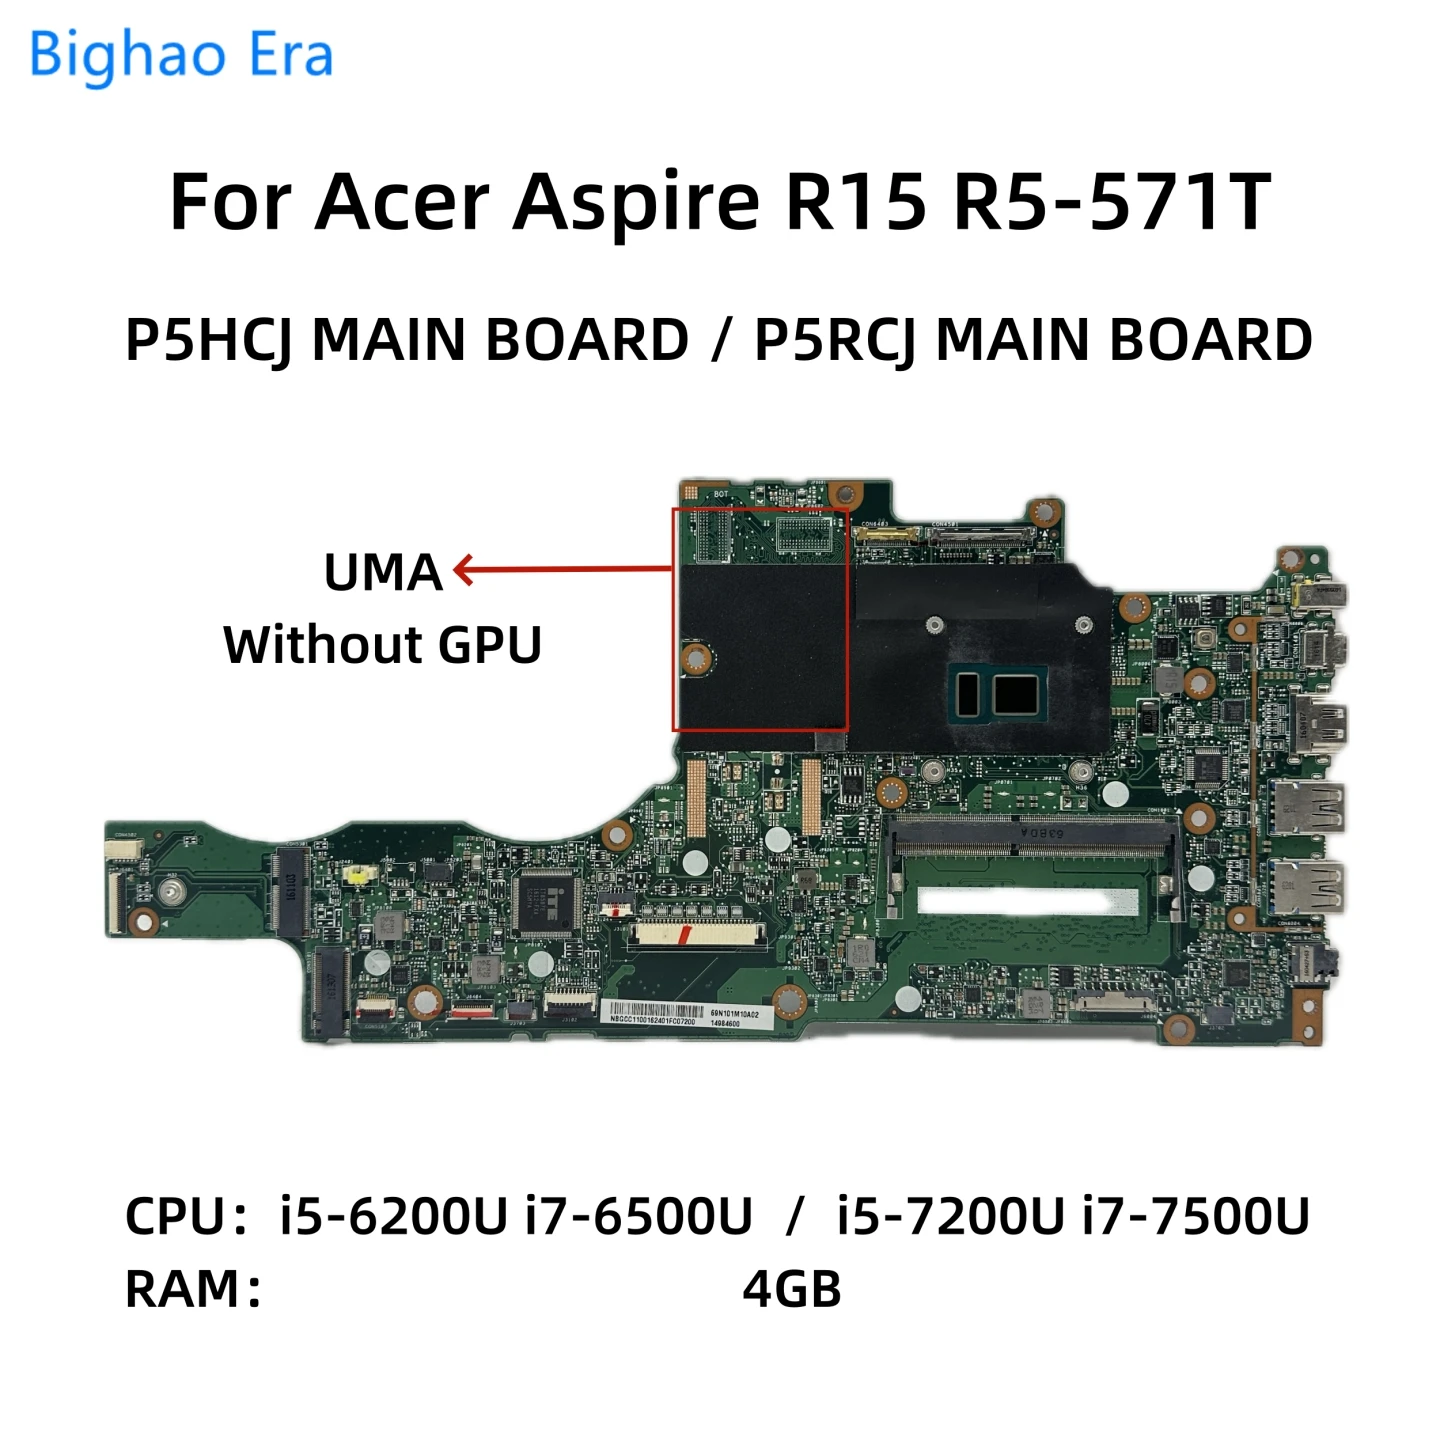 

For Acer Aspire R15 R5-571T Laptop Motherboard With i5-6200U i7-7500U CPU UMA DDR4 4GB-RAM P5HCJ/P5RCJ MAIN BOARD NB.GCC11.001